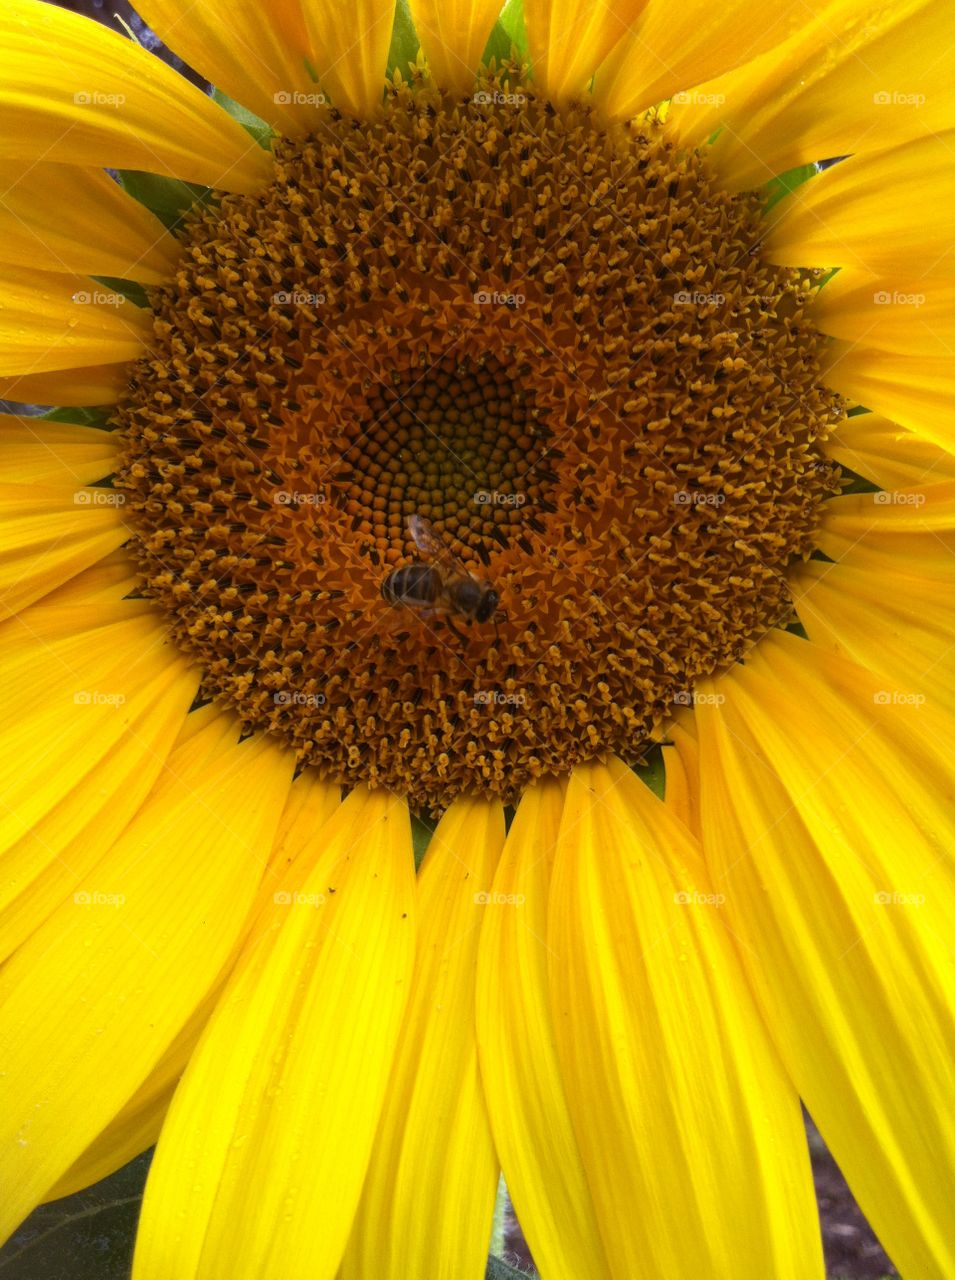 Bees collecting pollen from the sunflowers